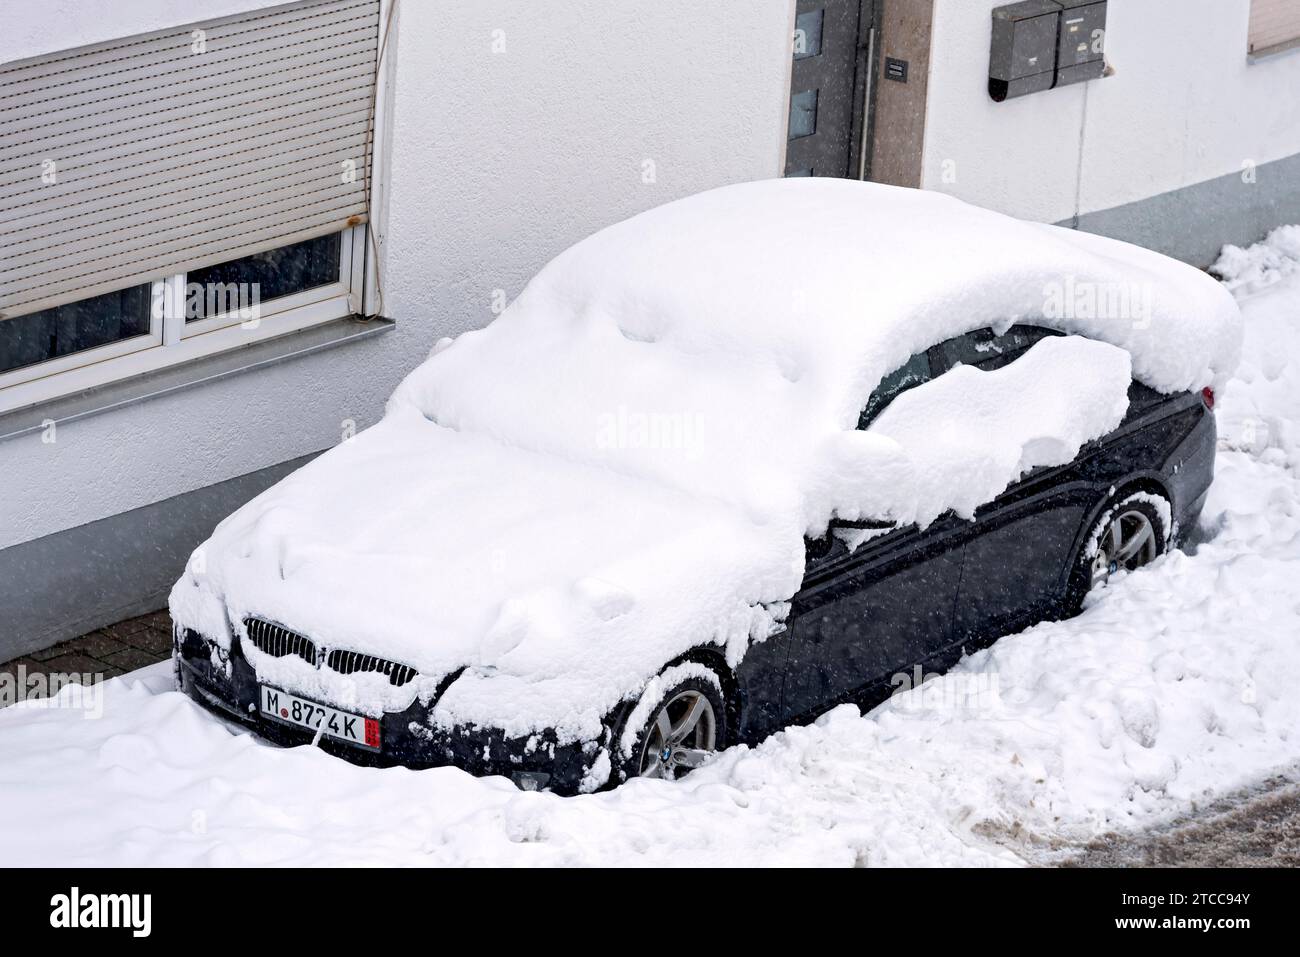 Car, car, snowed in on car park in front of house, fresh snow, heavy snowfall, masses of snow, snow chaos, onset of winter, Marzling, Freising, Upper Stock Photo